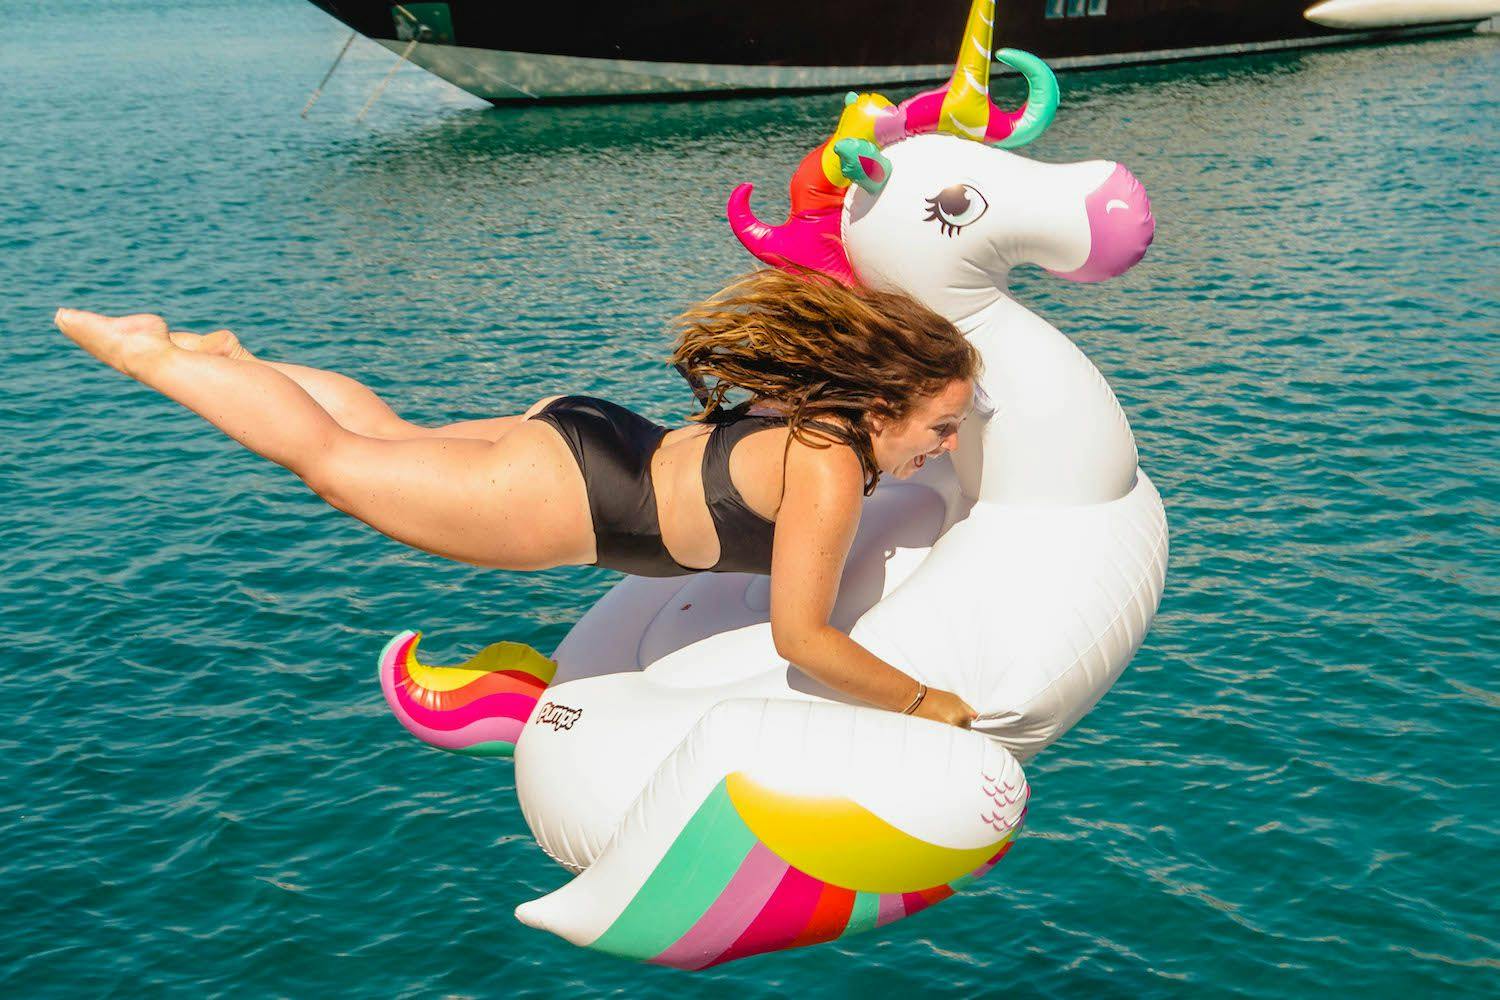 Photo if a girl jumping into water with an inflatable unicorn floatie. Photo by Ryan Brown of Lost Bly Memoirs